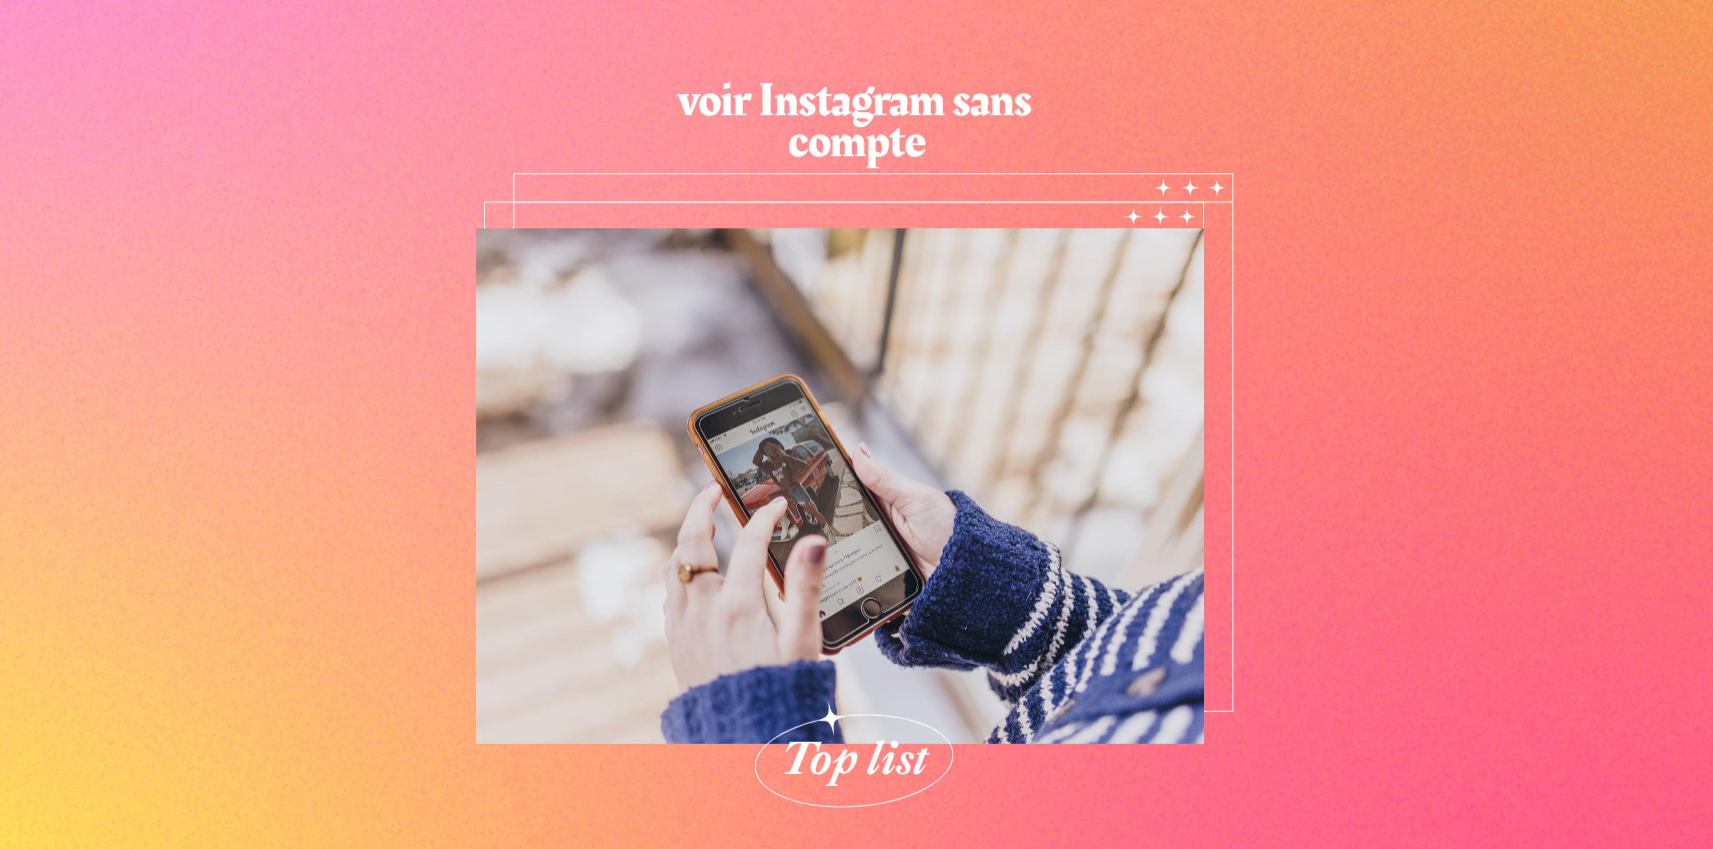 Top Best Sites to View Instagram Without an Account